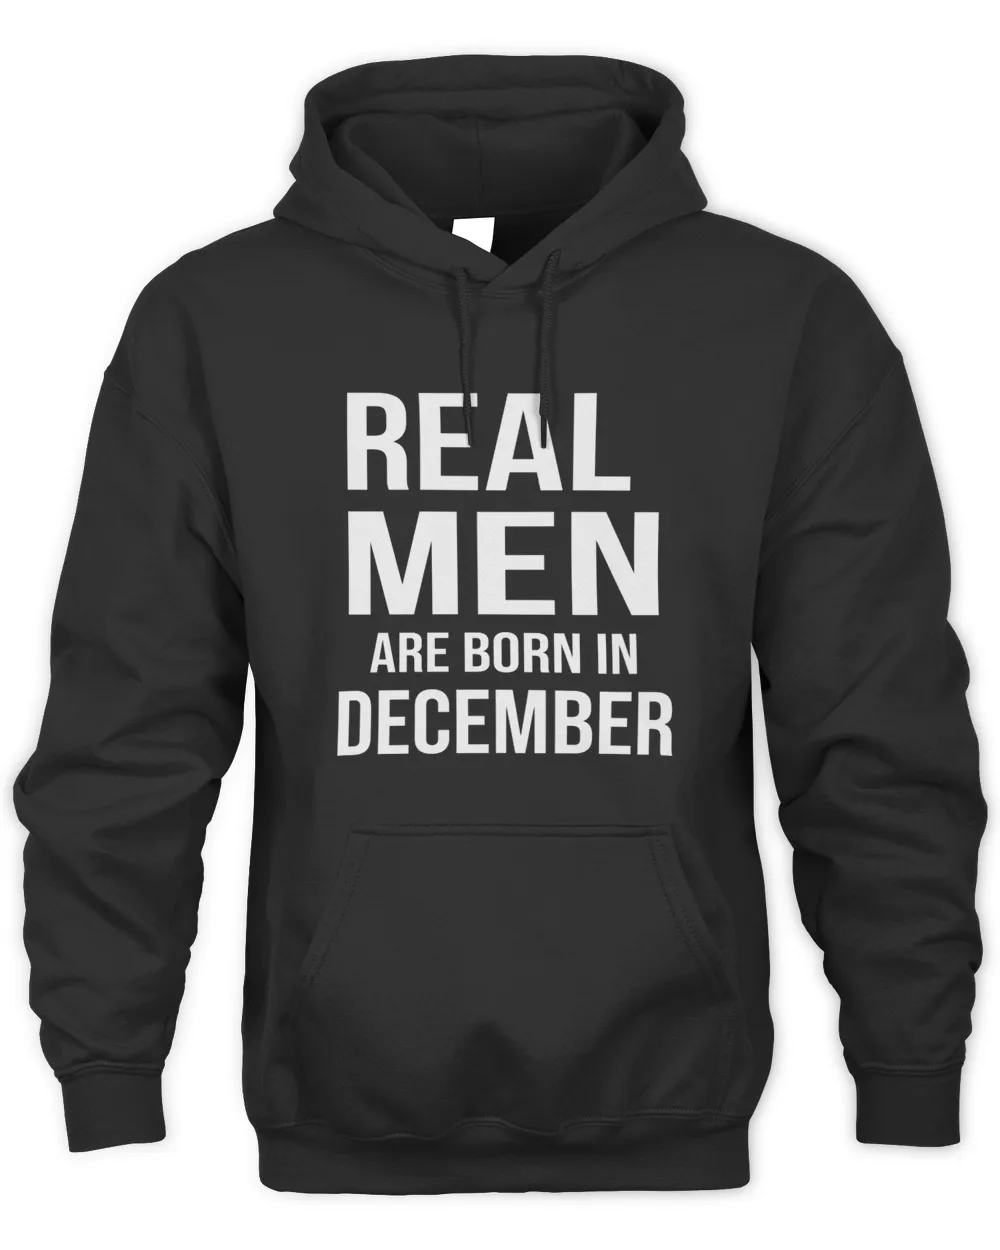 [Personalize] Real men